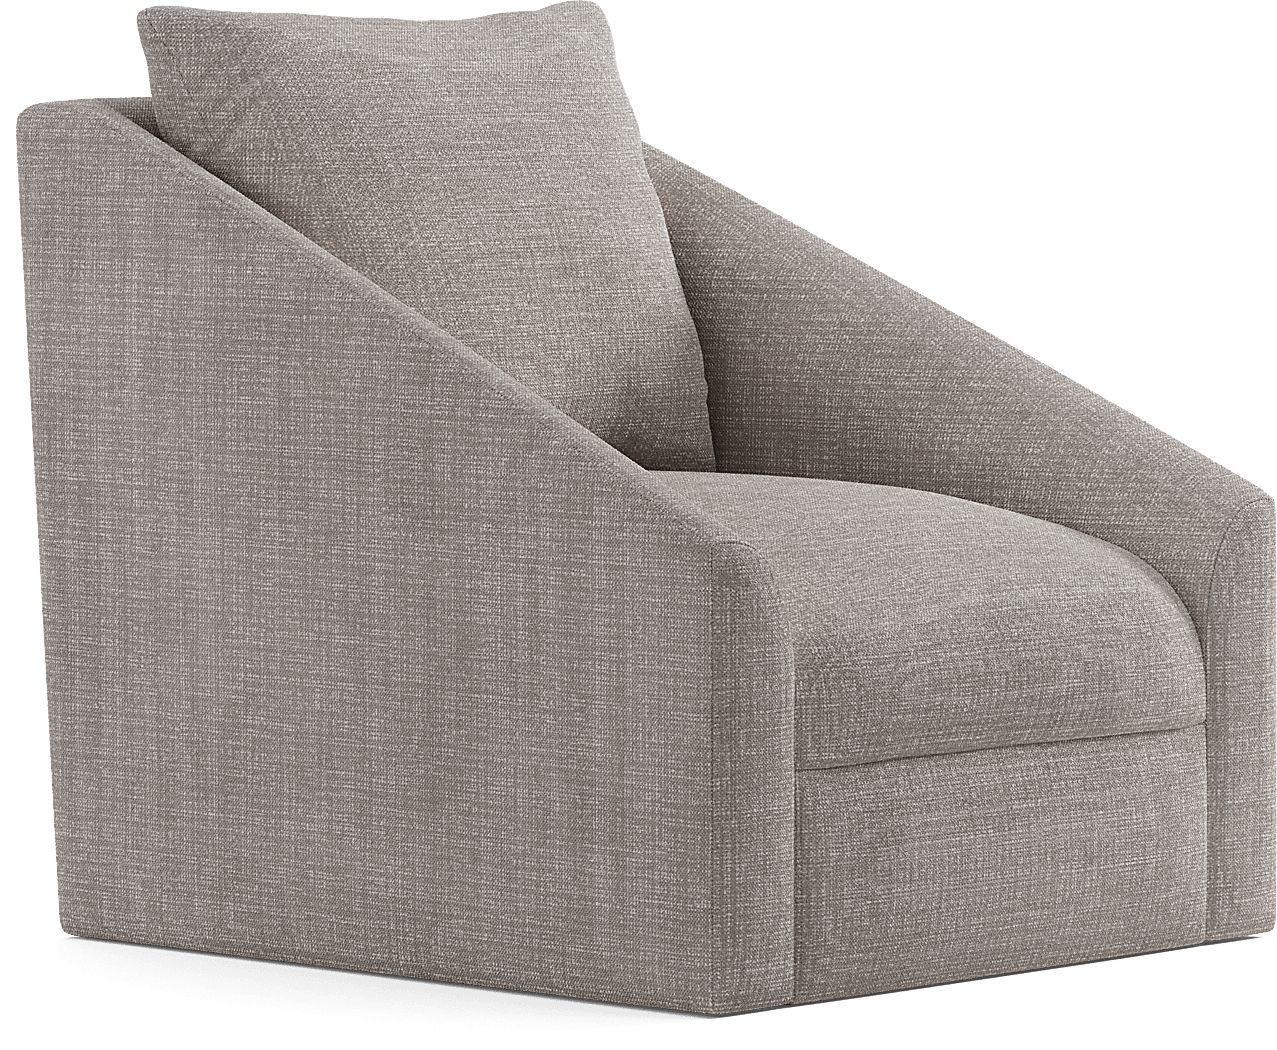 Cindy Crawford Home Sheridan Square Gray Swivel Accent Chair